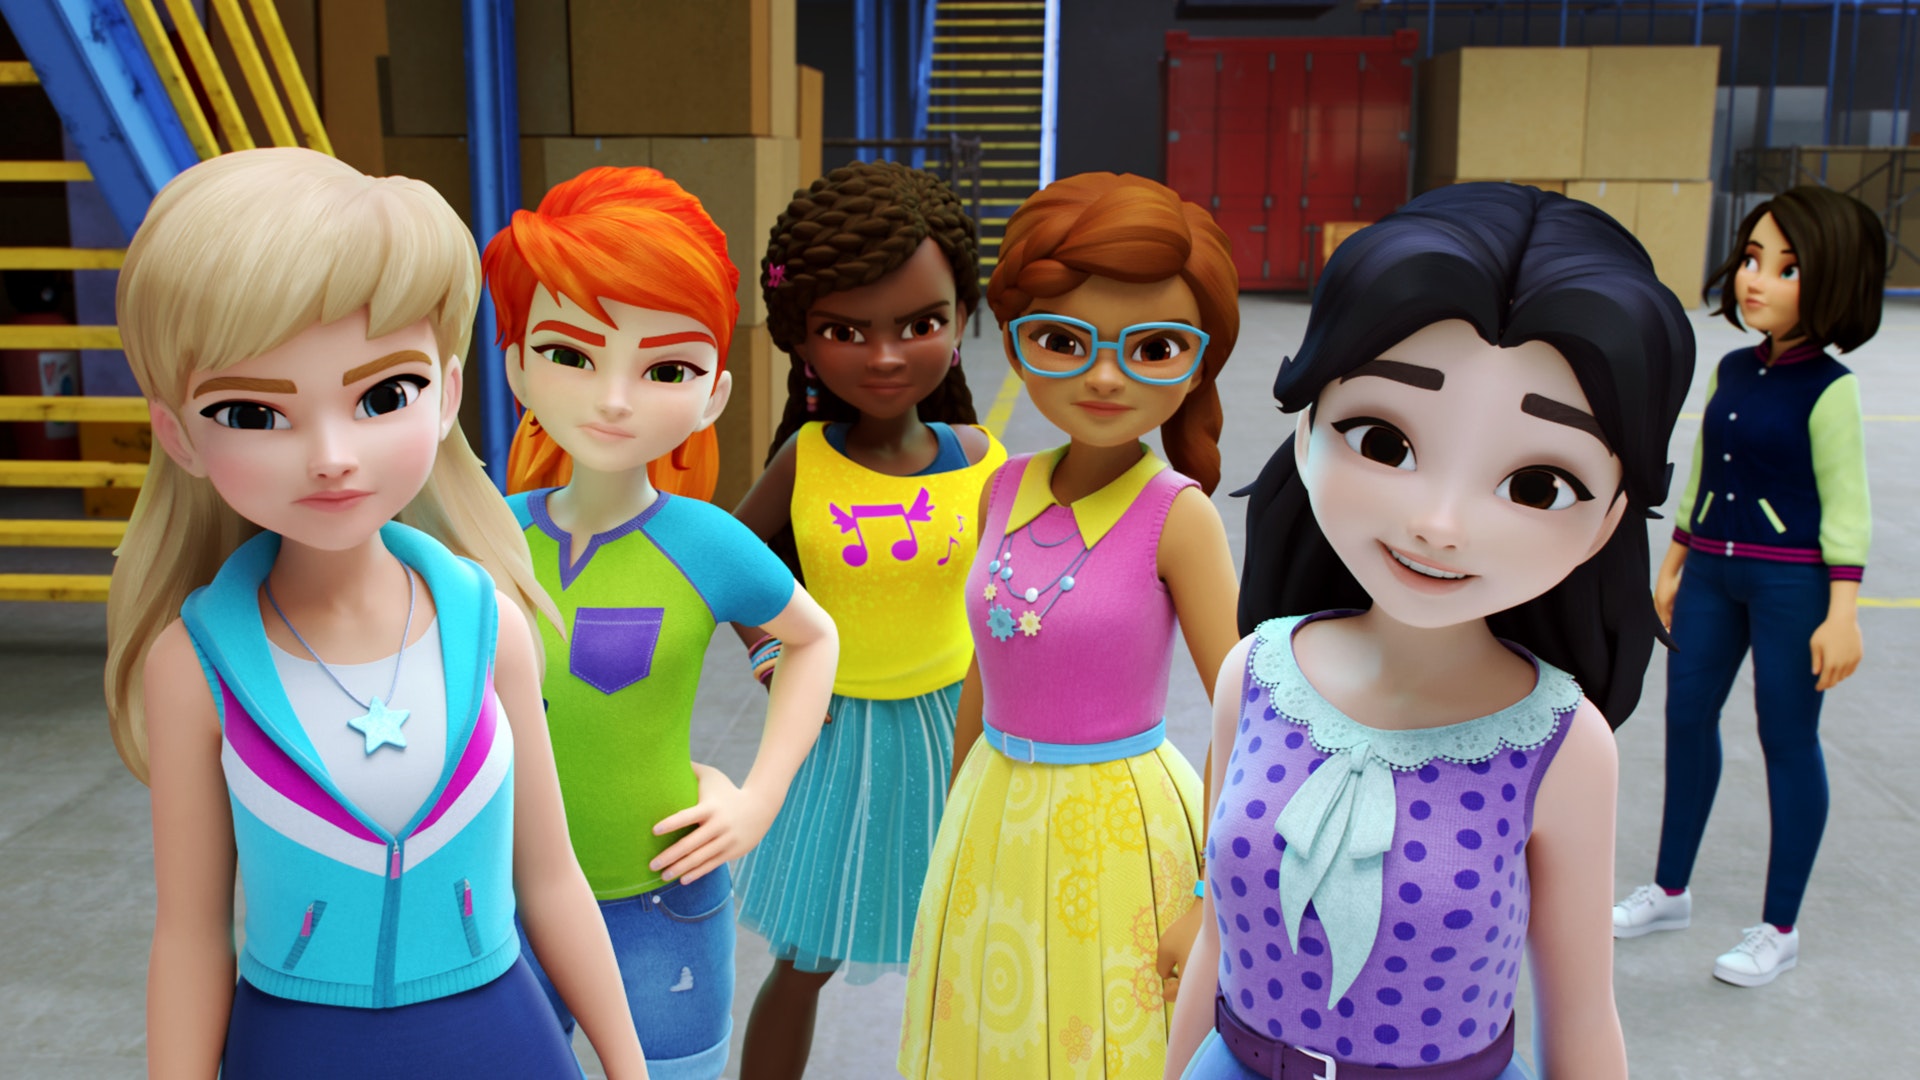 Lego Friends Girls On A The Mission 1920x1080 Wallpaper